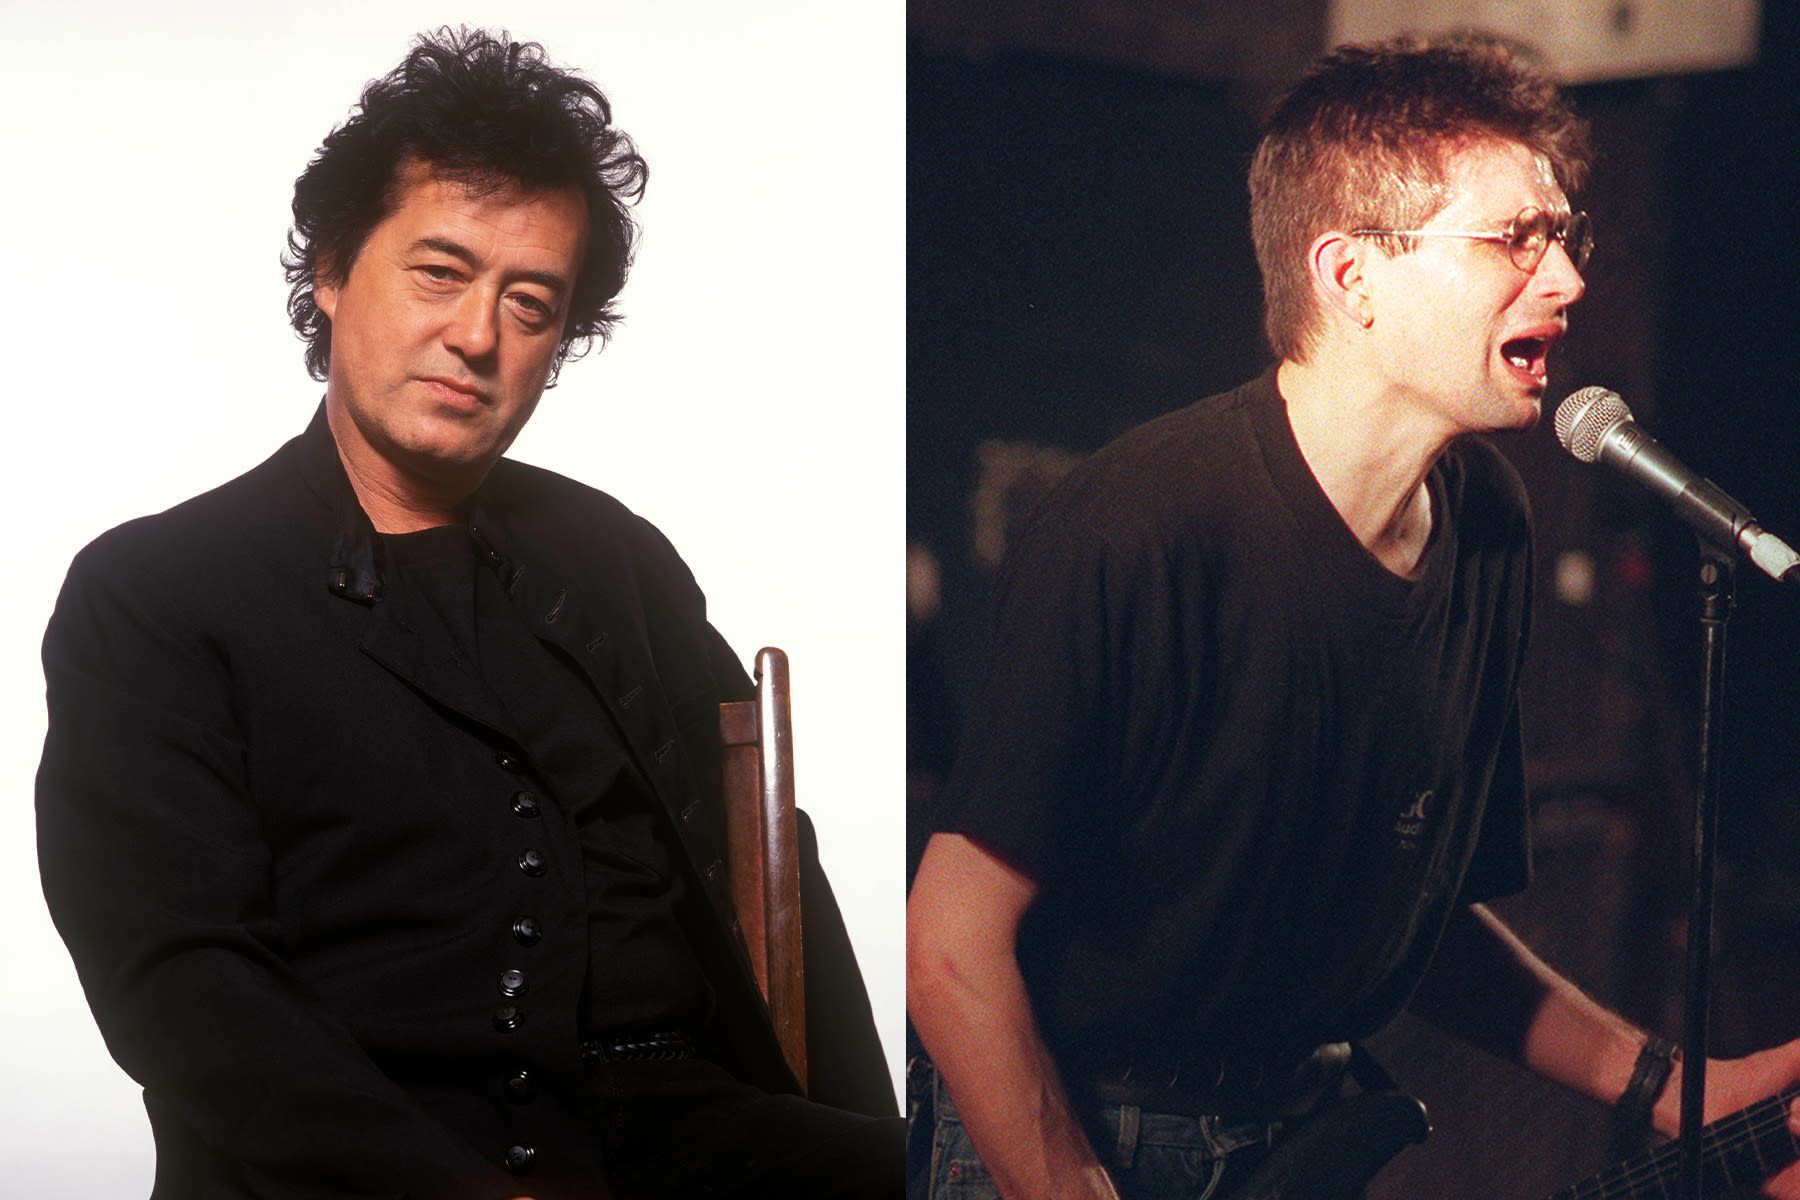 Jimmy Page Pays Tribute to Steve Albini: He ‘Leaves a Real Legacy’